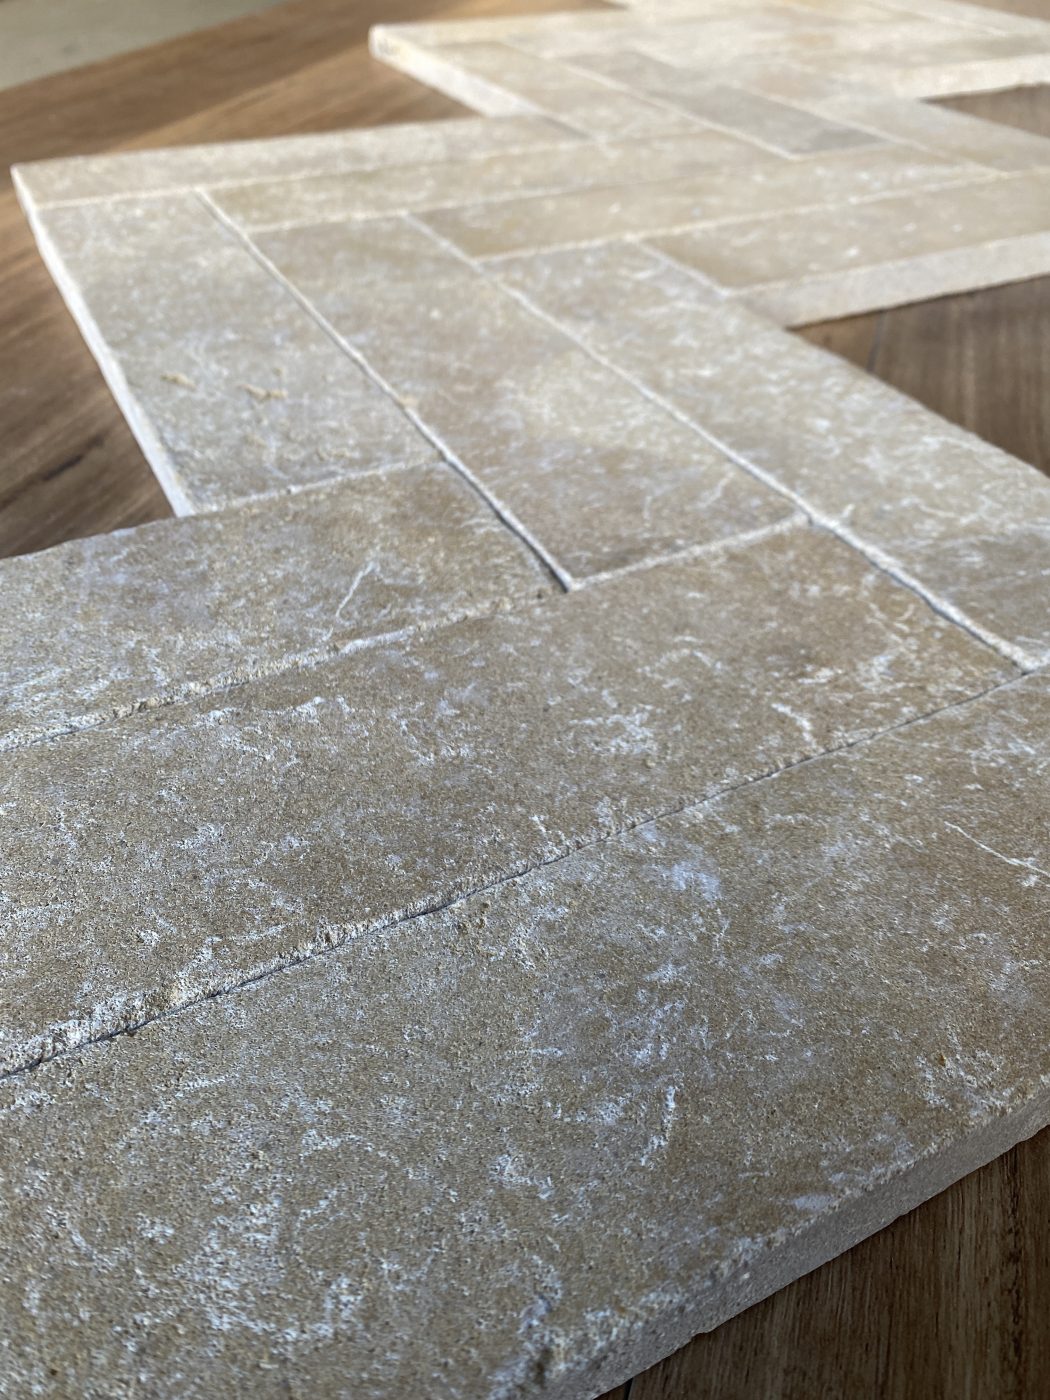 NICE-BRUSHED-TUMBLED-LIMESTONE-BATTONS_RMS-TRADERS_NATURAL-STONE-PAVER-SUPPLIER-MELBOURNE-5-1-scaled